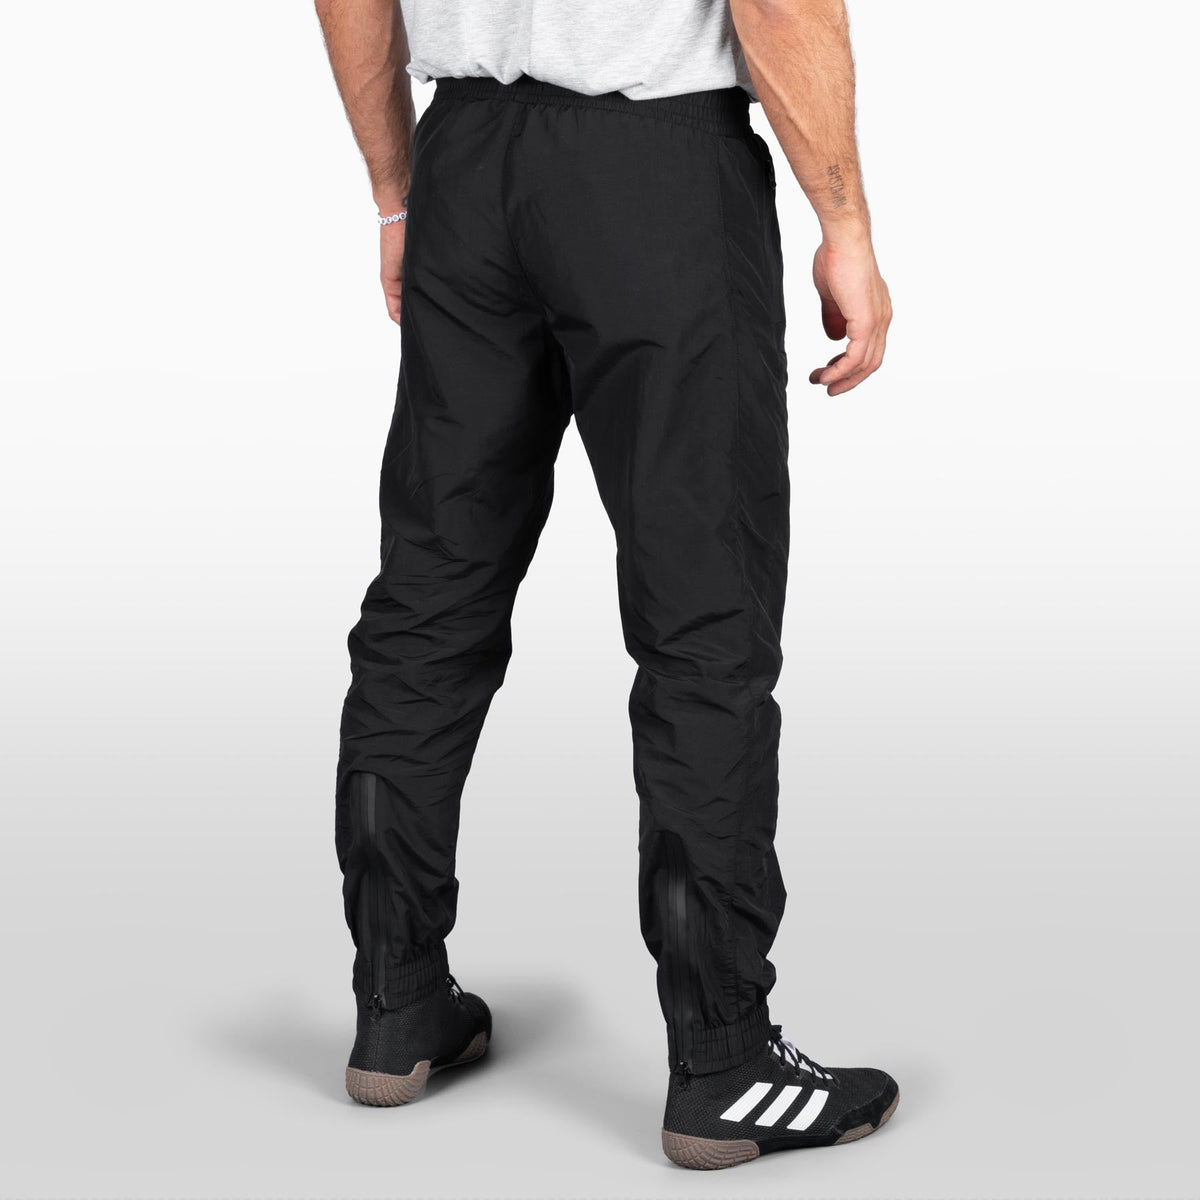 The DMC training suit for martial artists. Ideal for wrestling, MMA, BJJ warmup or jogging. High-quality materials and a sporty cut with a clean design and zippers on the legs so you can easily put it on and take off with shoes.